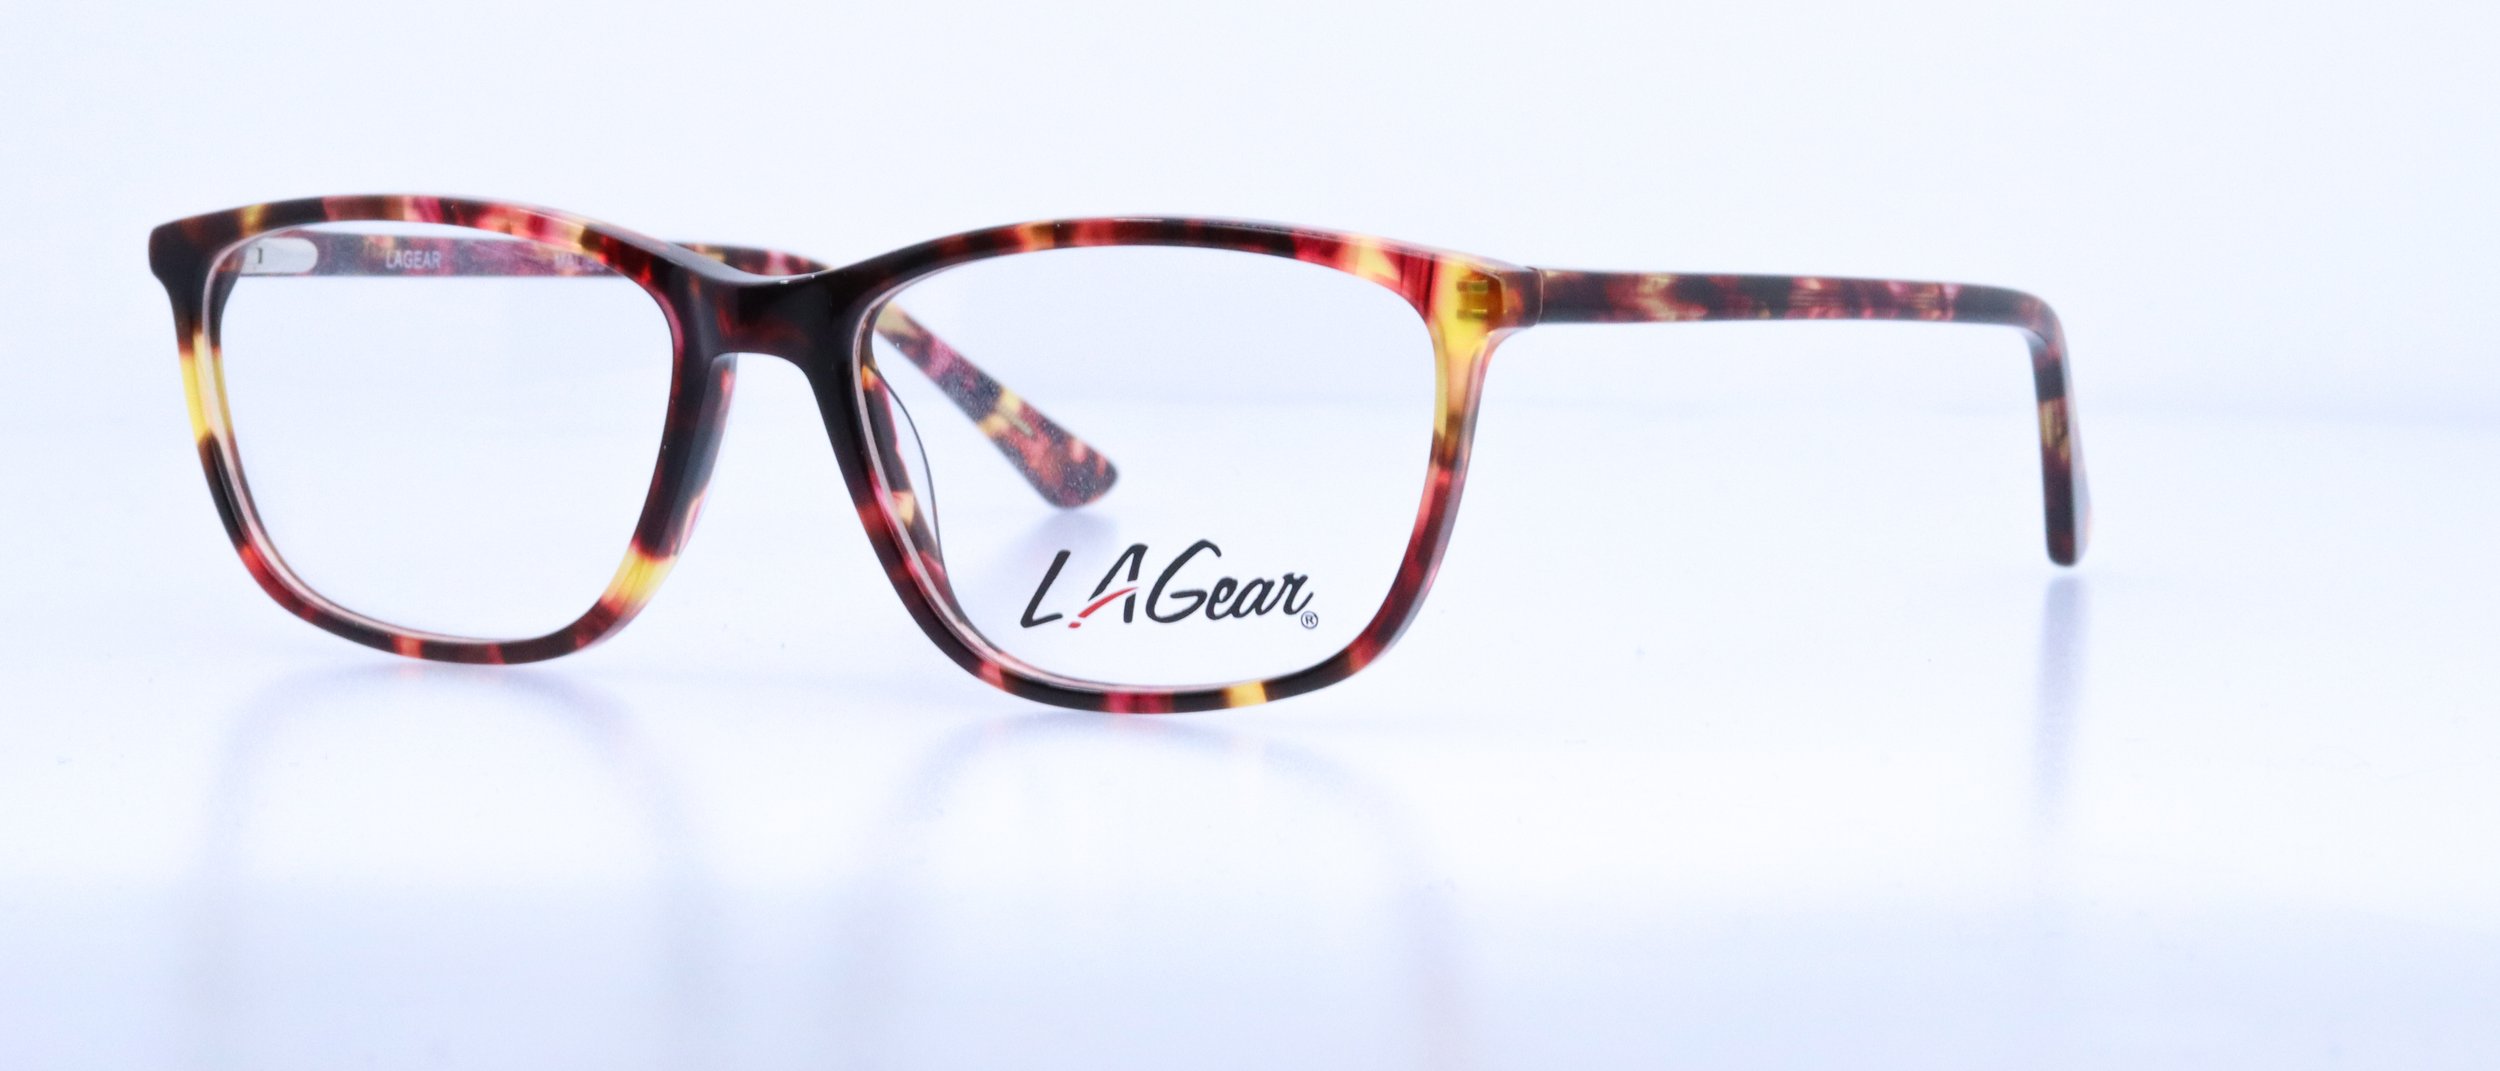  Malibu: 52-16-135, Available in Plum/Tortoise or Red 